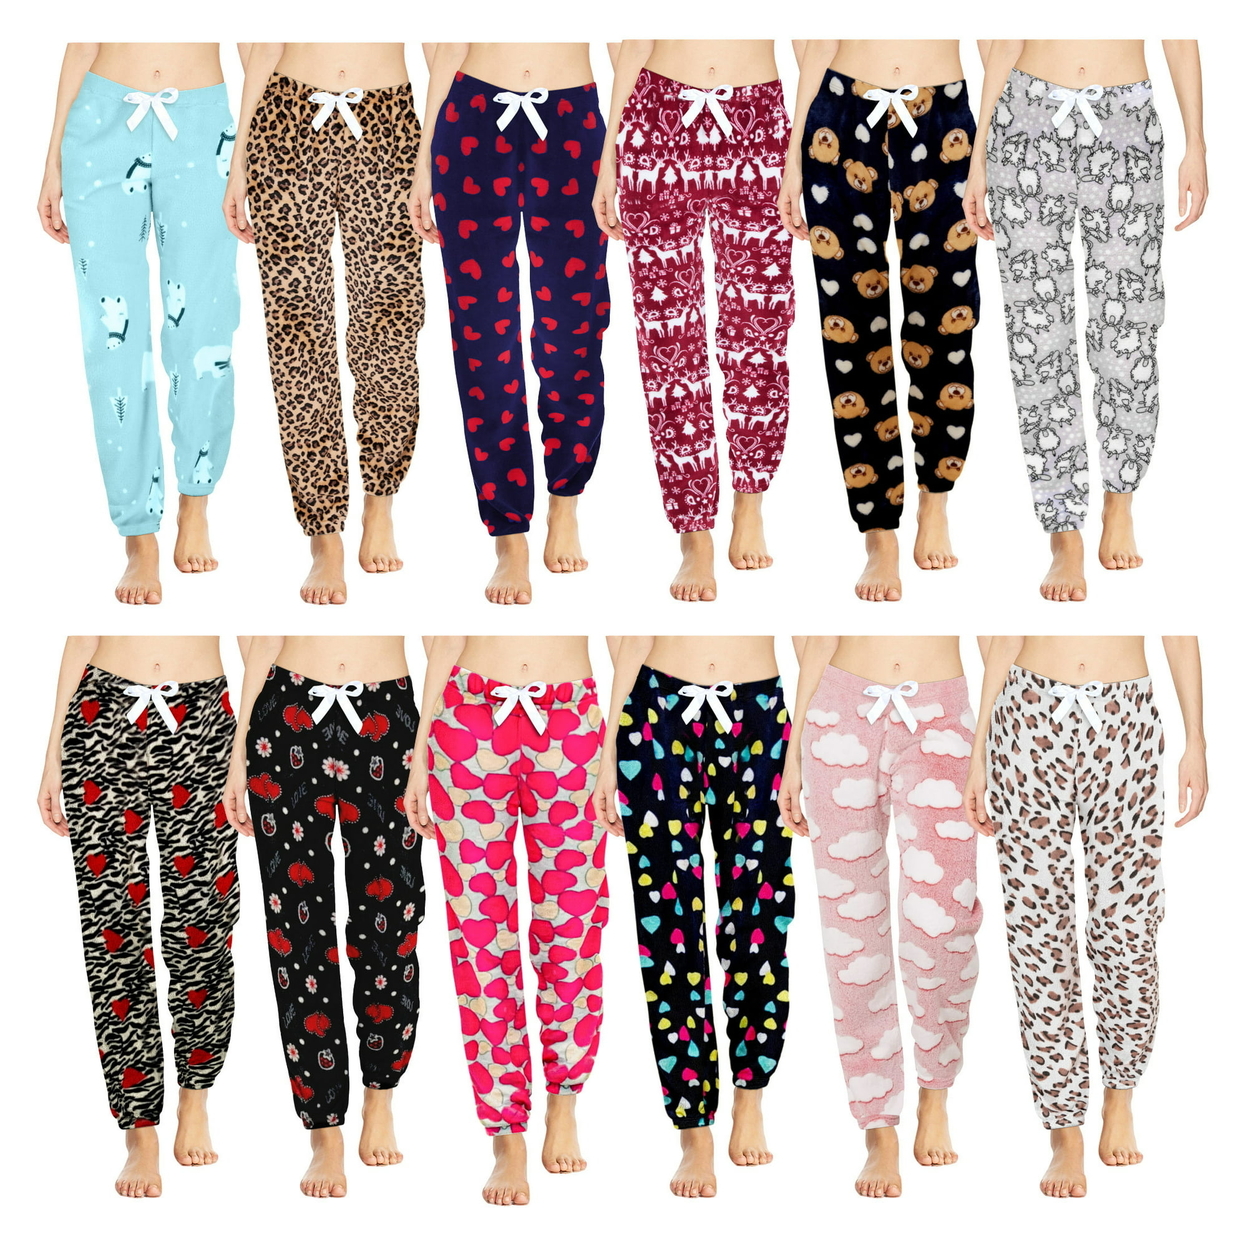 3-Pack: Women's Printed Ultra-Soft Comfy Stretch Micro-Fleece Pajama Lounge Pants - Xx-large, Shapes